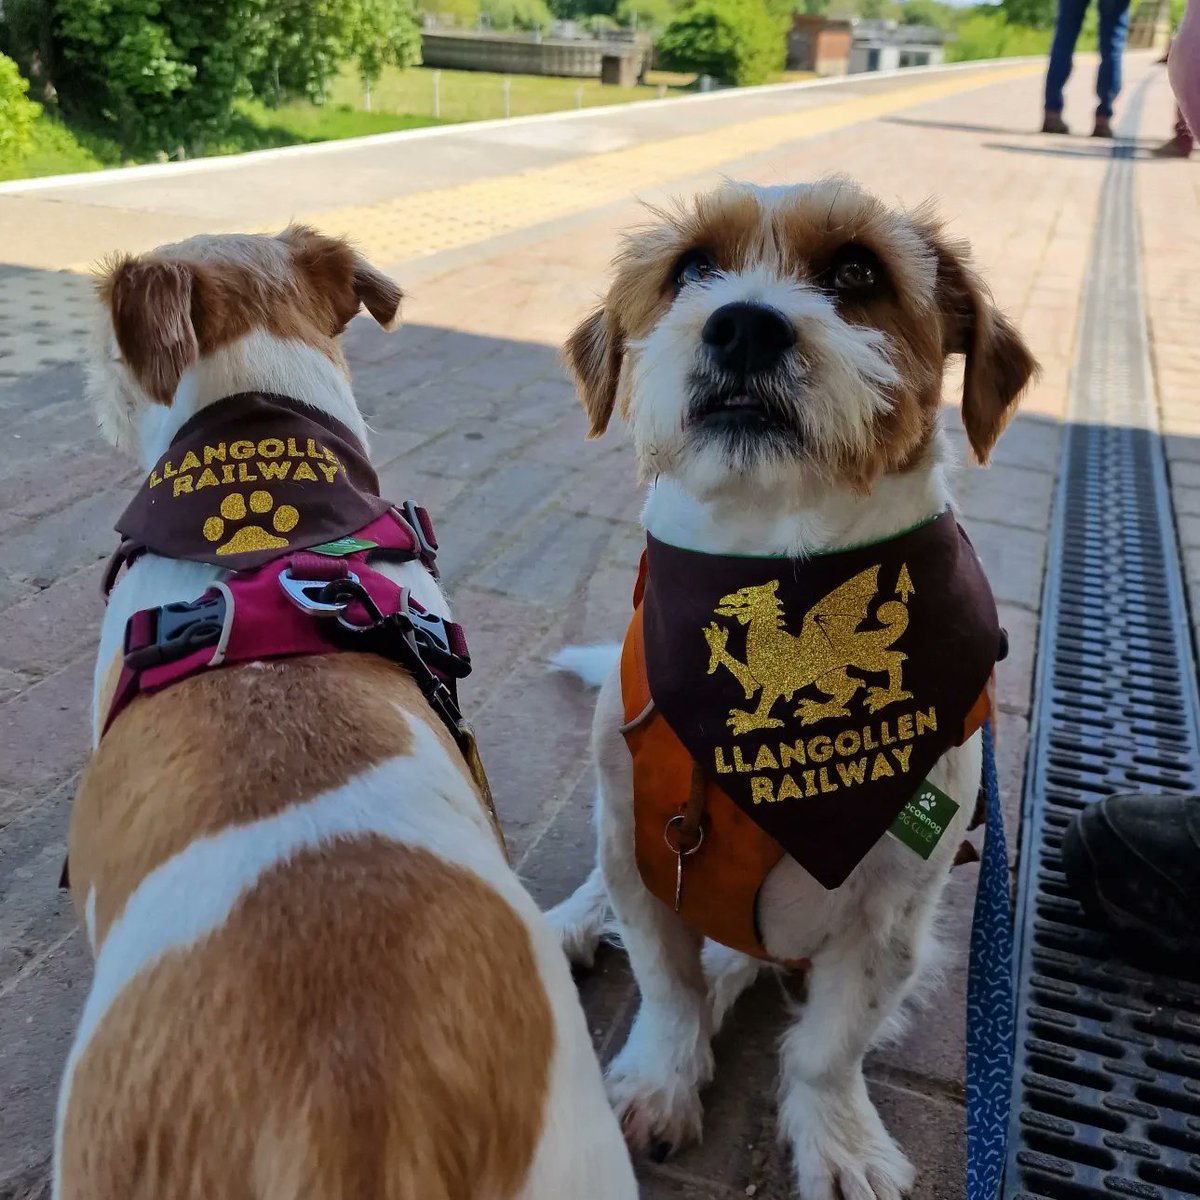 New railway launched at #Corwen this weekend! So we're off on a train adventure! #steamtrain #Llangollen #dogs #denbighshire #dogsoftwitter @DiscoverCymru